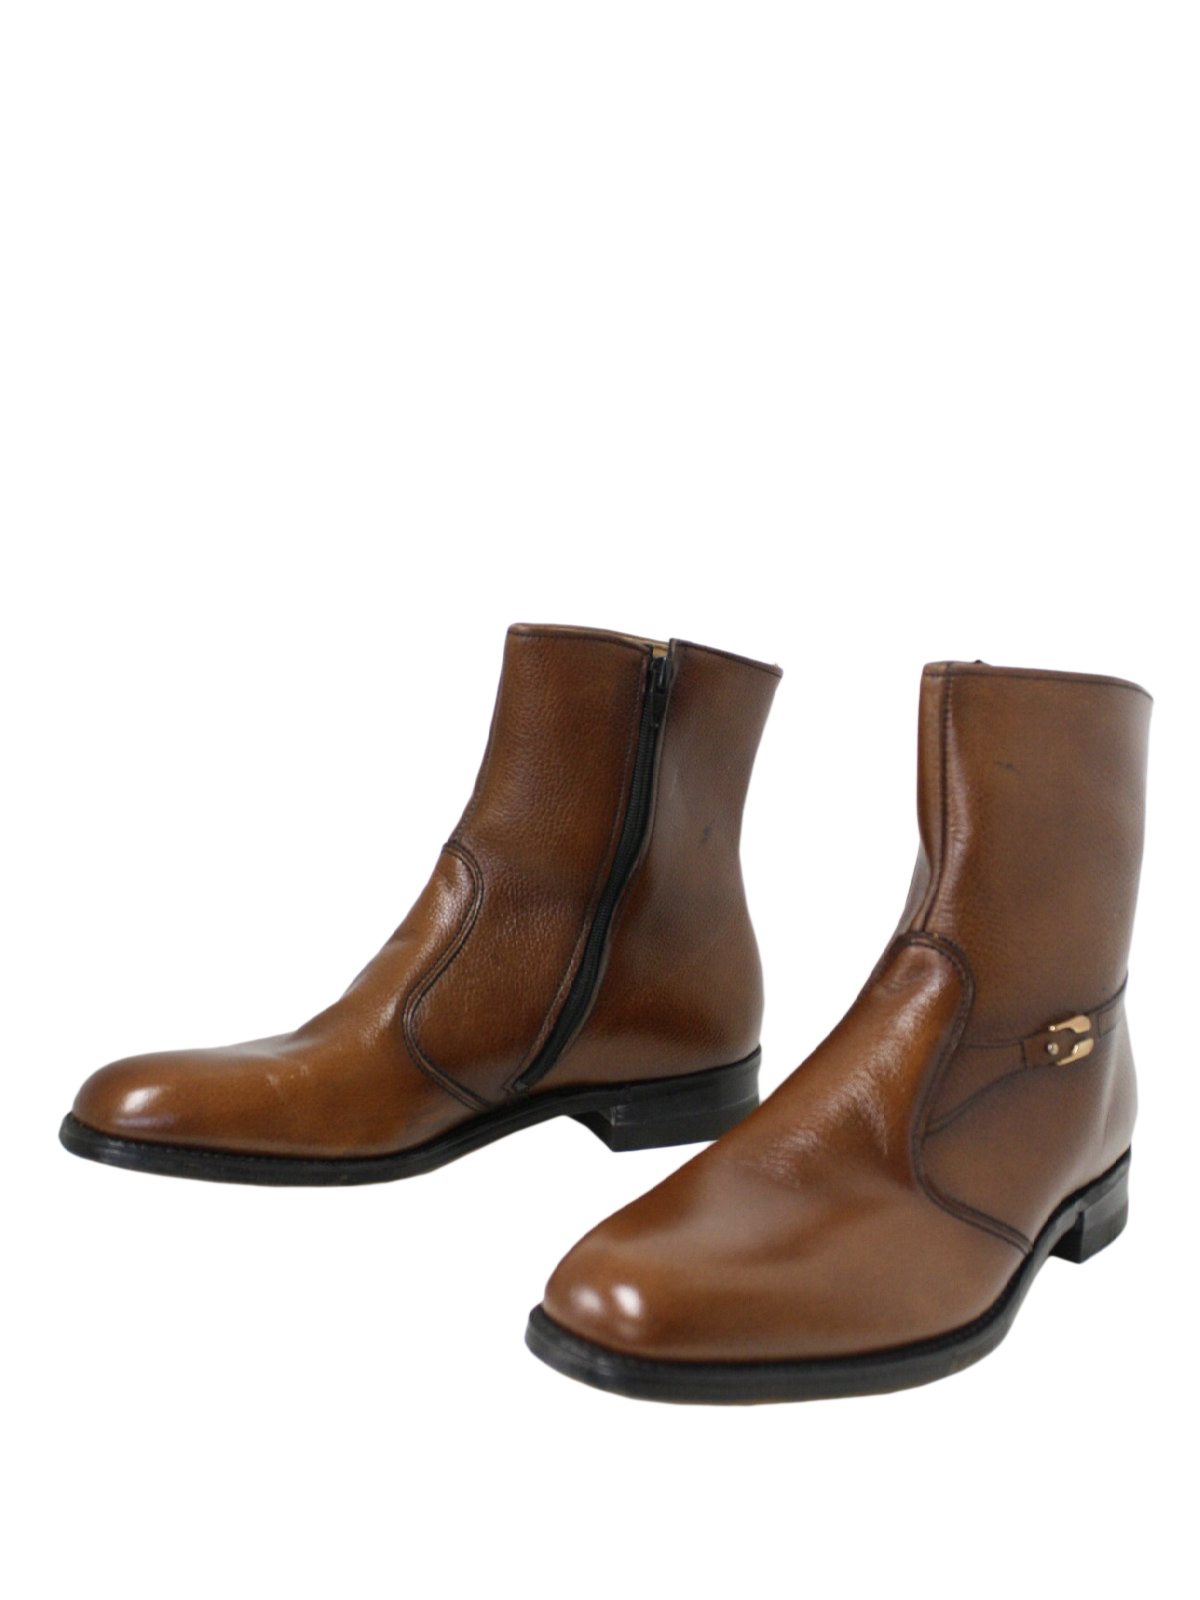 1970's Shoes (Stacy Adams): 70s -Stacy Adams- Mens brown leather ankle ...